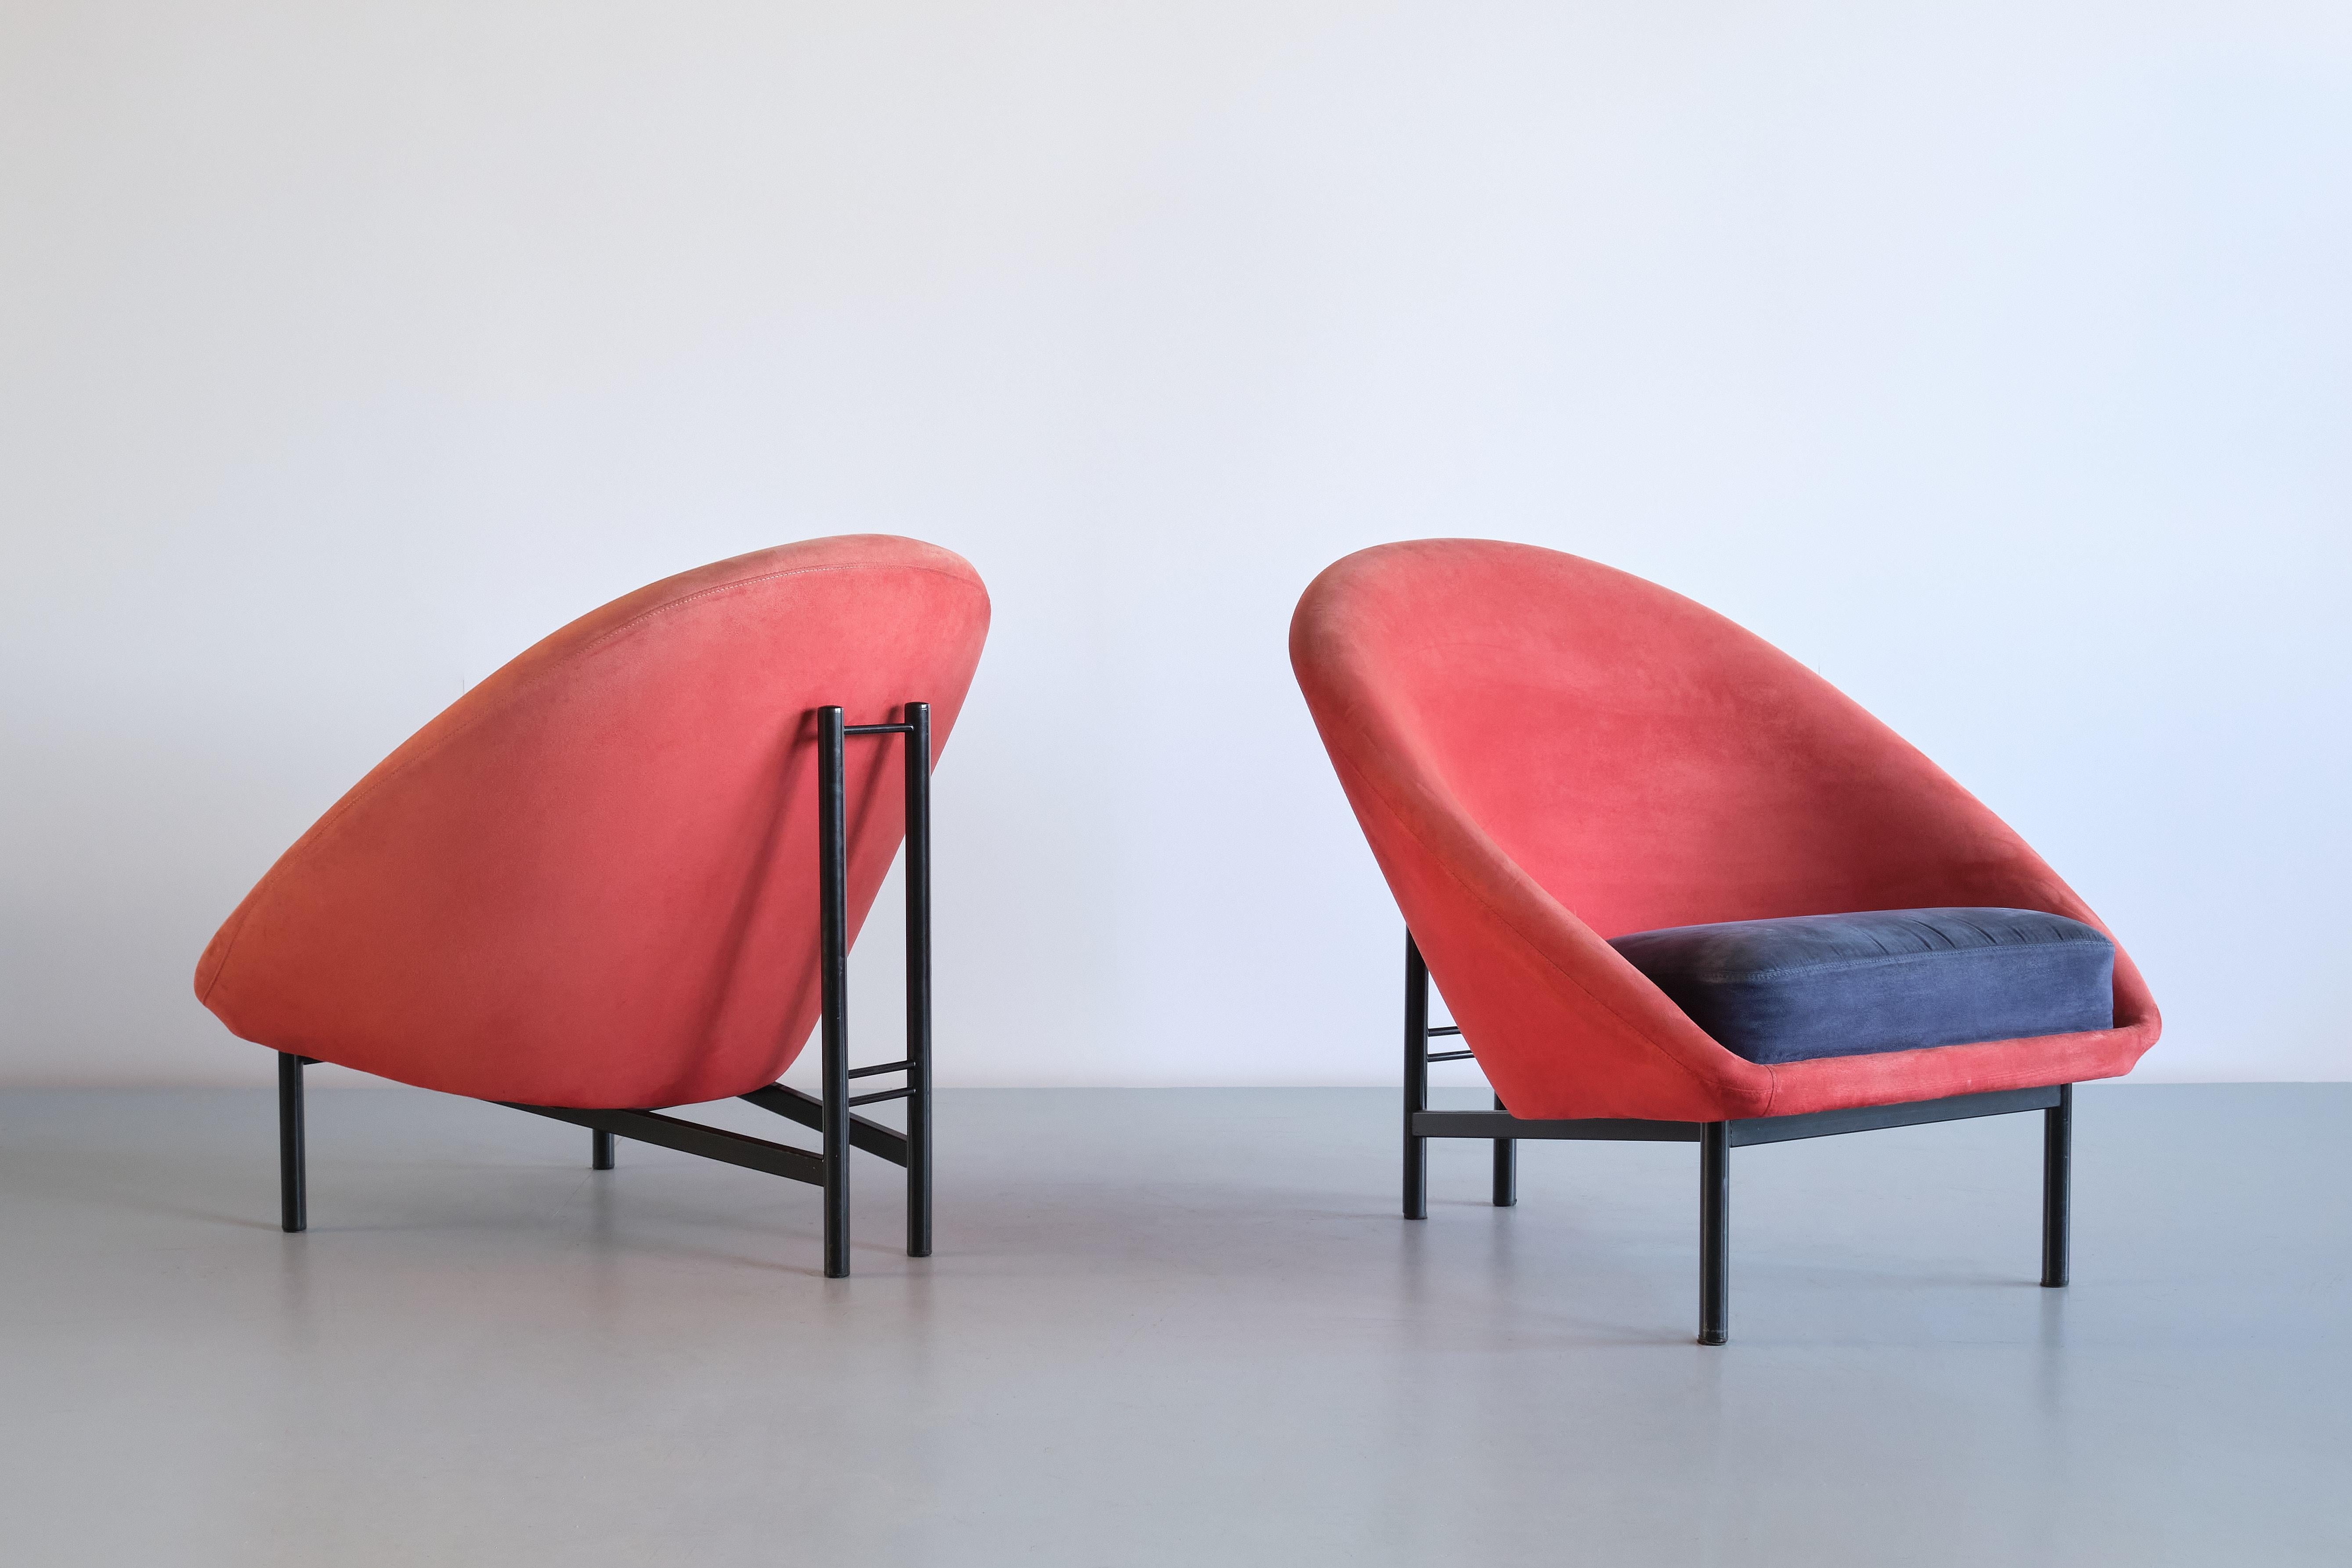 This striking pair of lounge chairs was designed by Theo Ruth in the early 1960s. The rare model numbered F815 was produced by Artifort in The Netherlands.
The design is marked by the rounded lines of the upholstered seat and the angled positioning